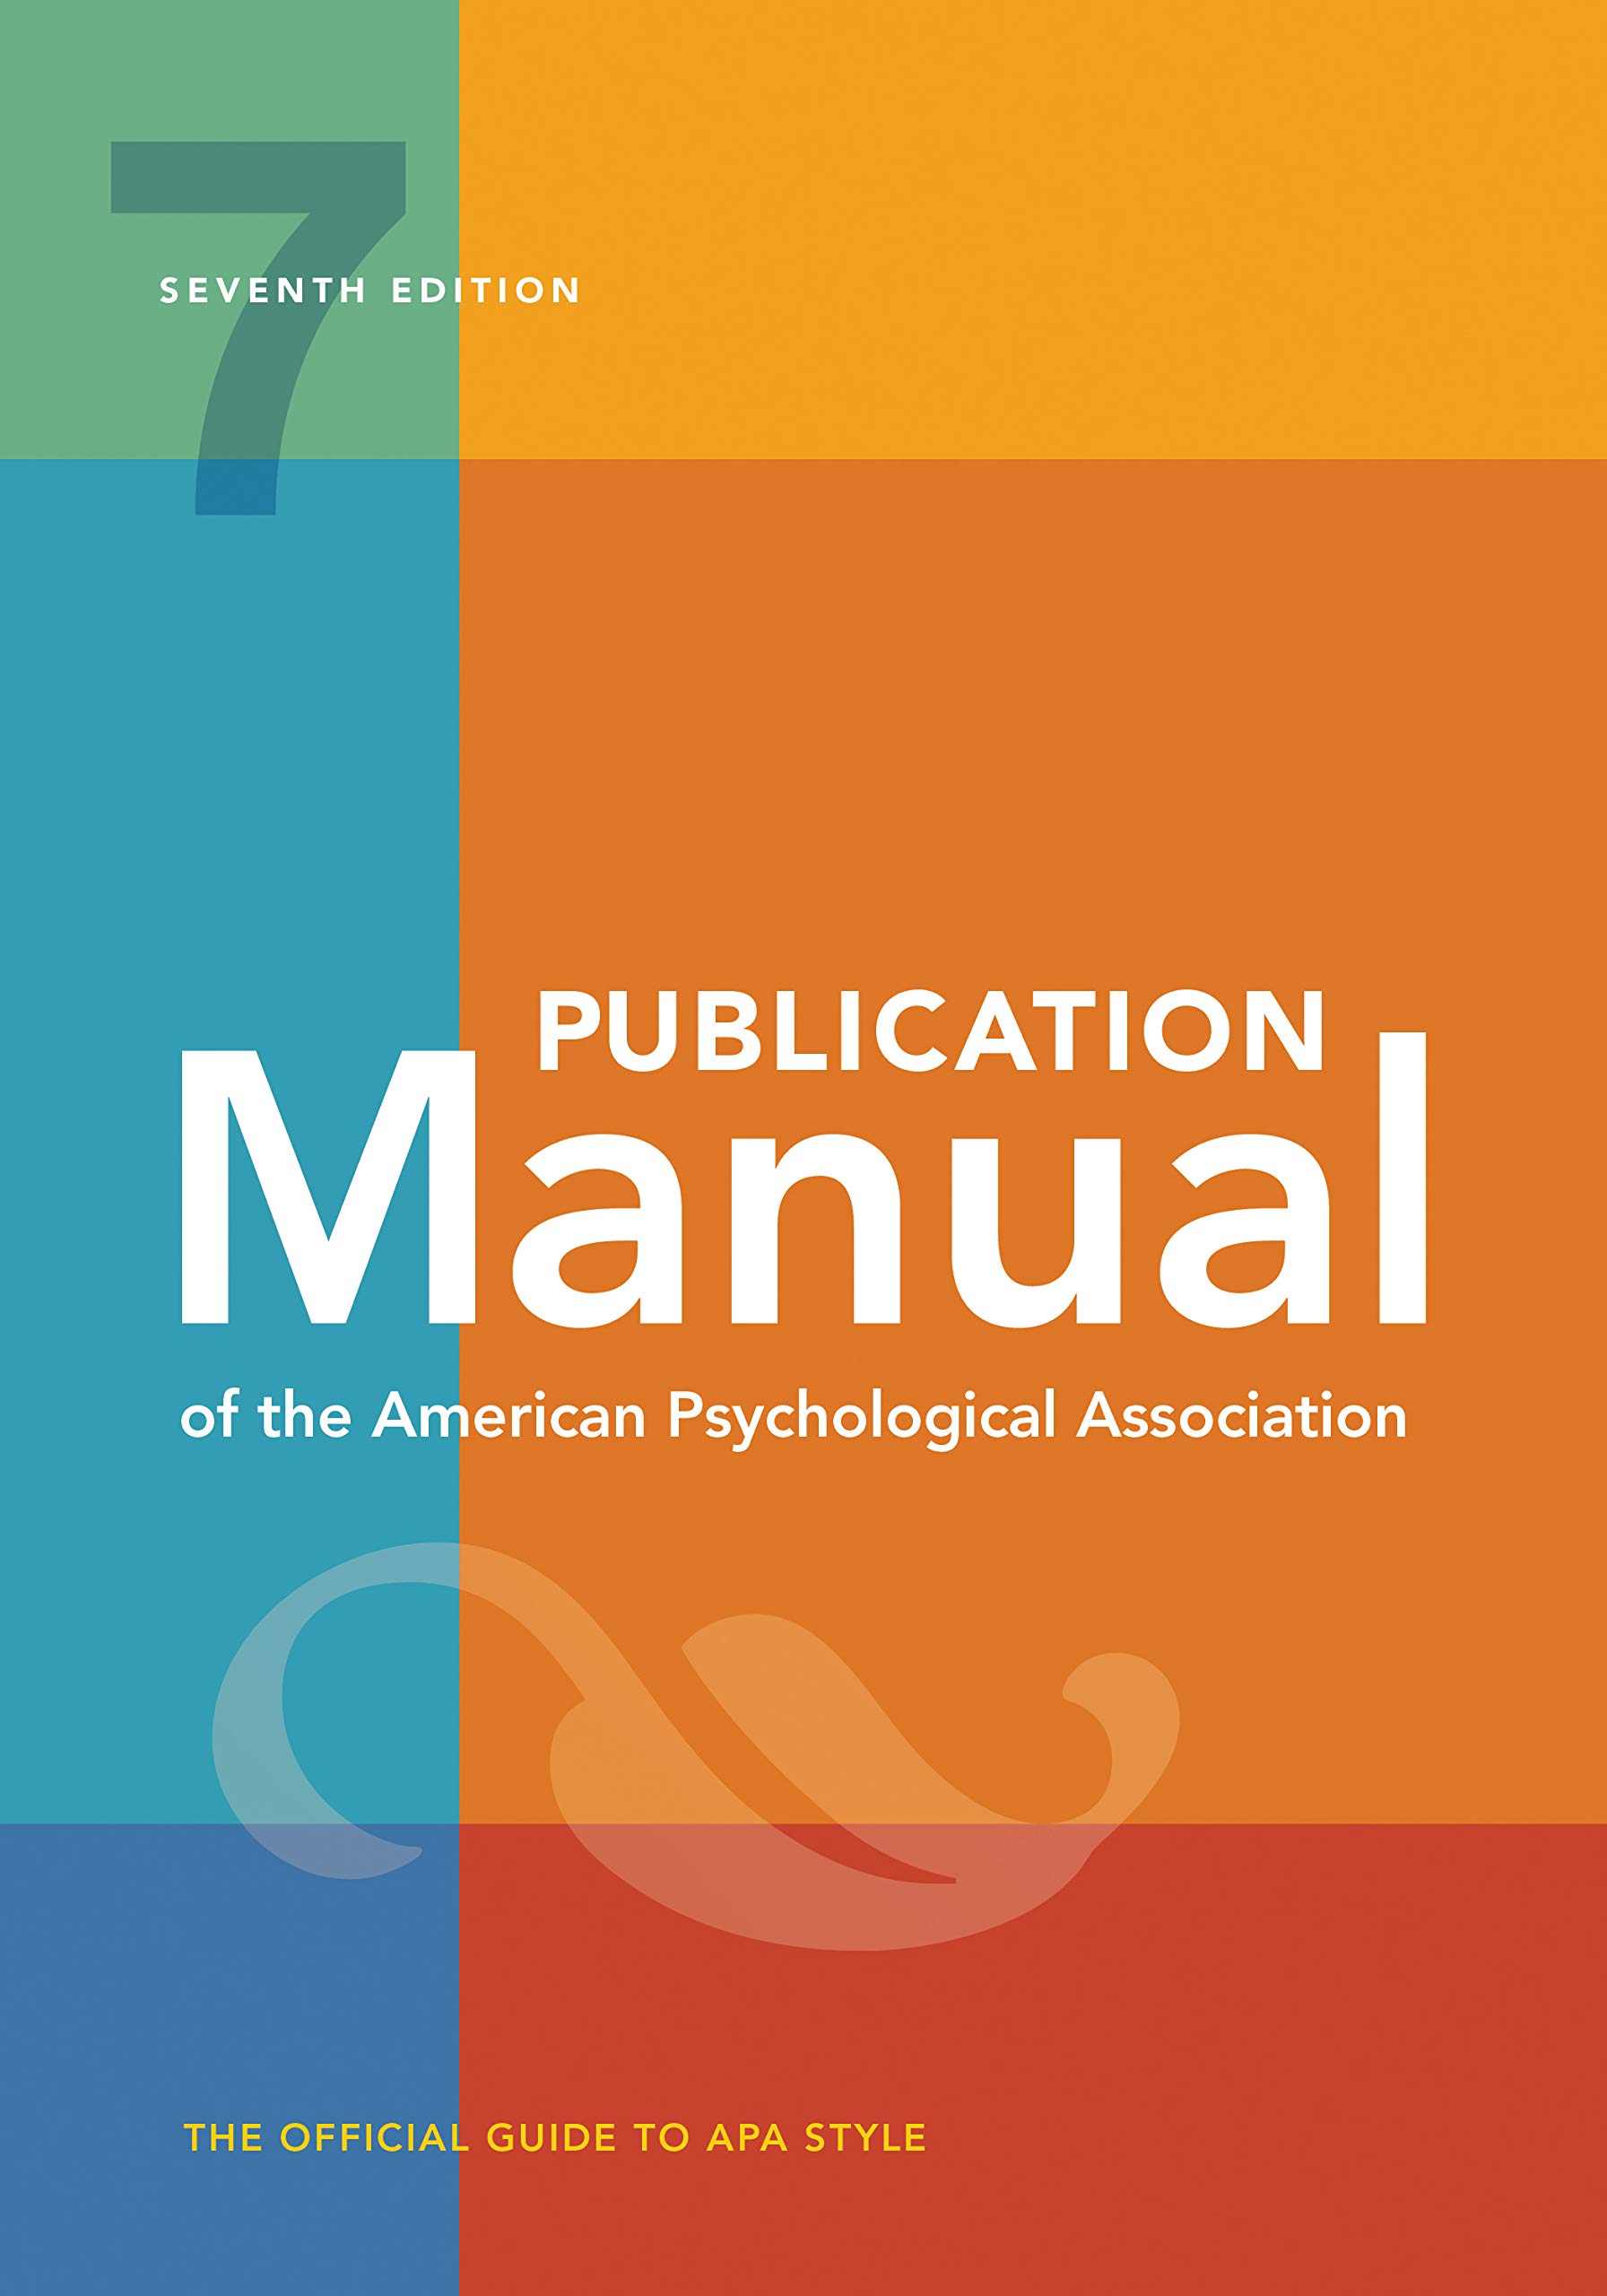 Publication Manual (OFFICIAL) 7th Edition of the American Psychological Association: 7th Edition, 2020 Copyright